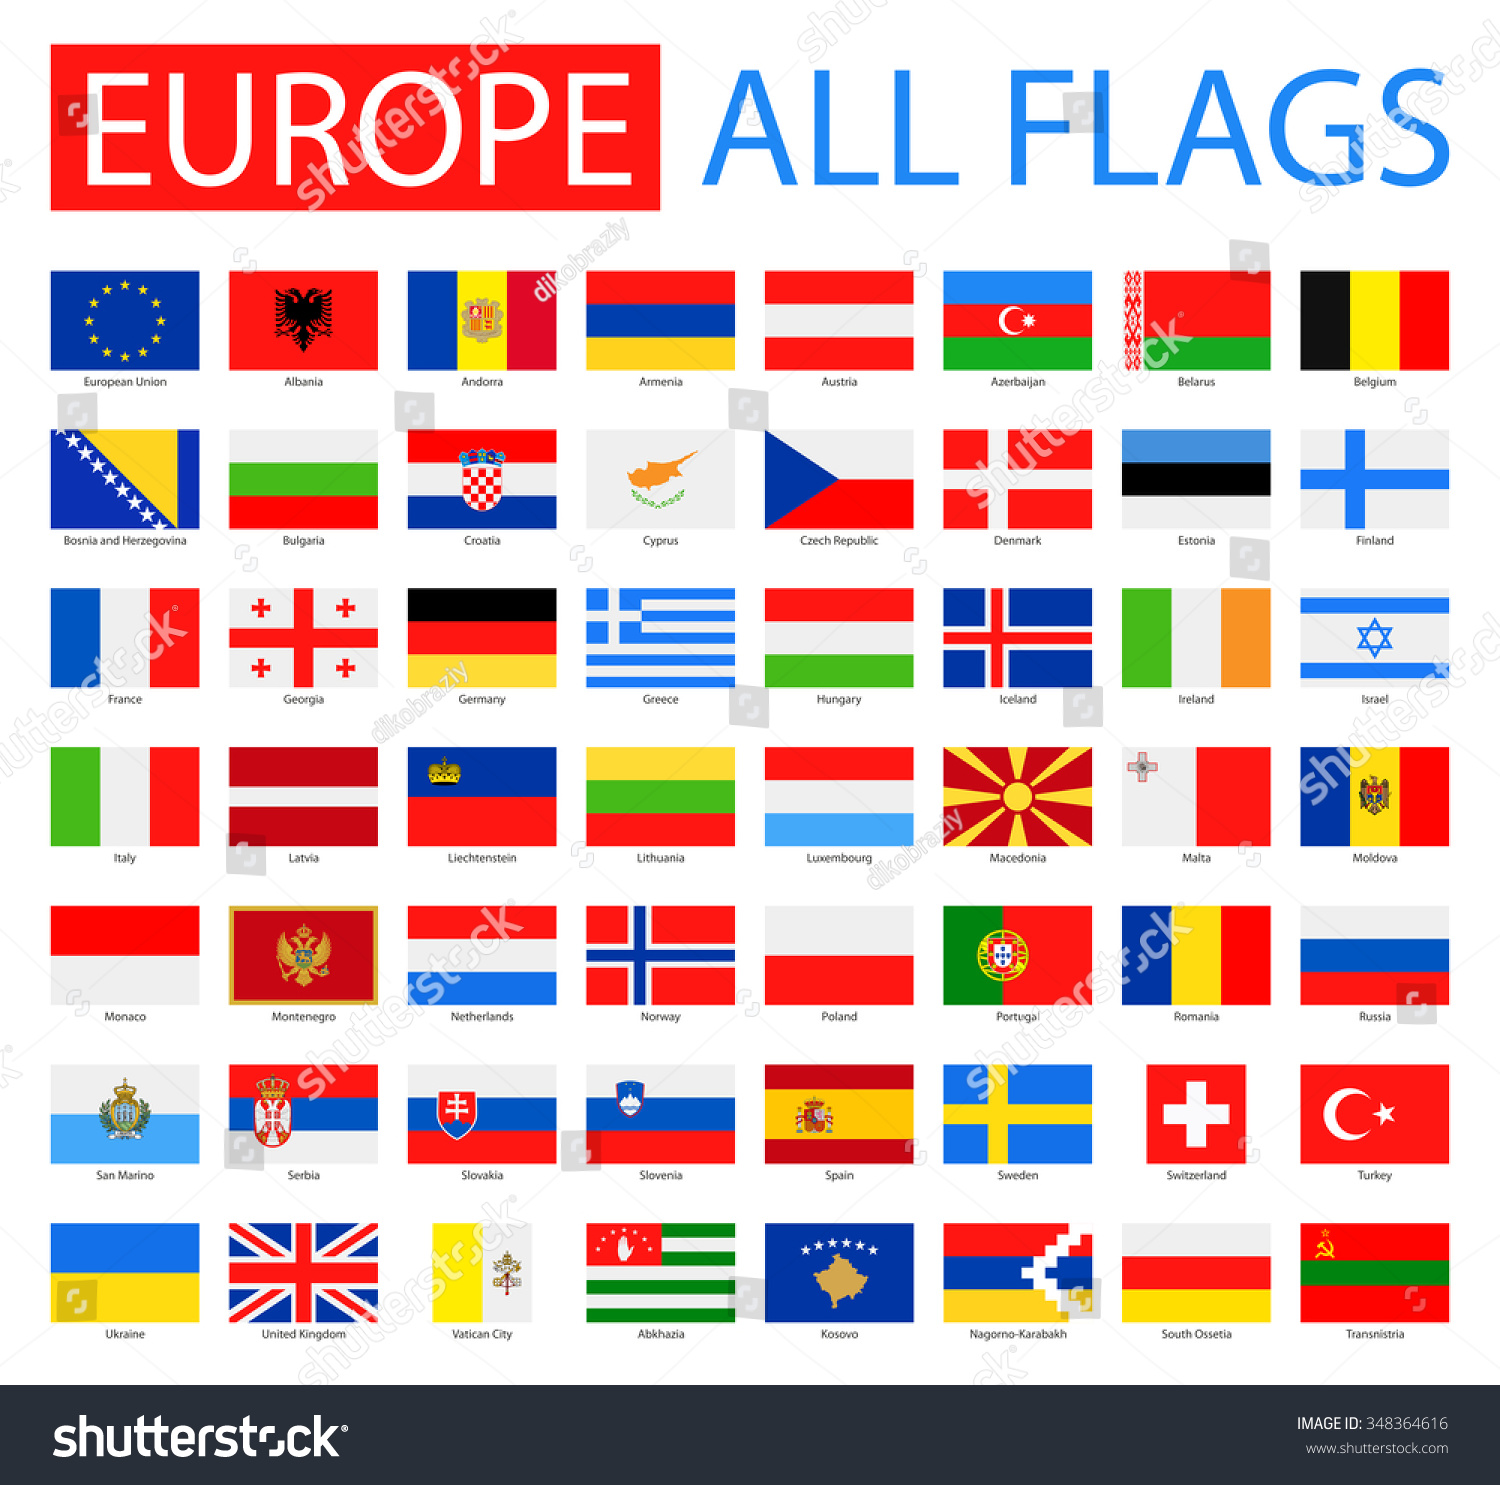 Flags Of Europe - Full Vector Collection - 348364616 : Shutterstock